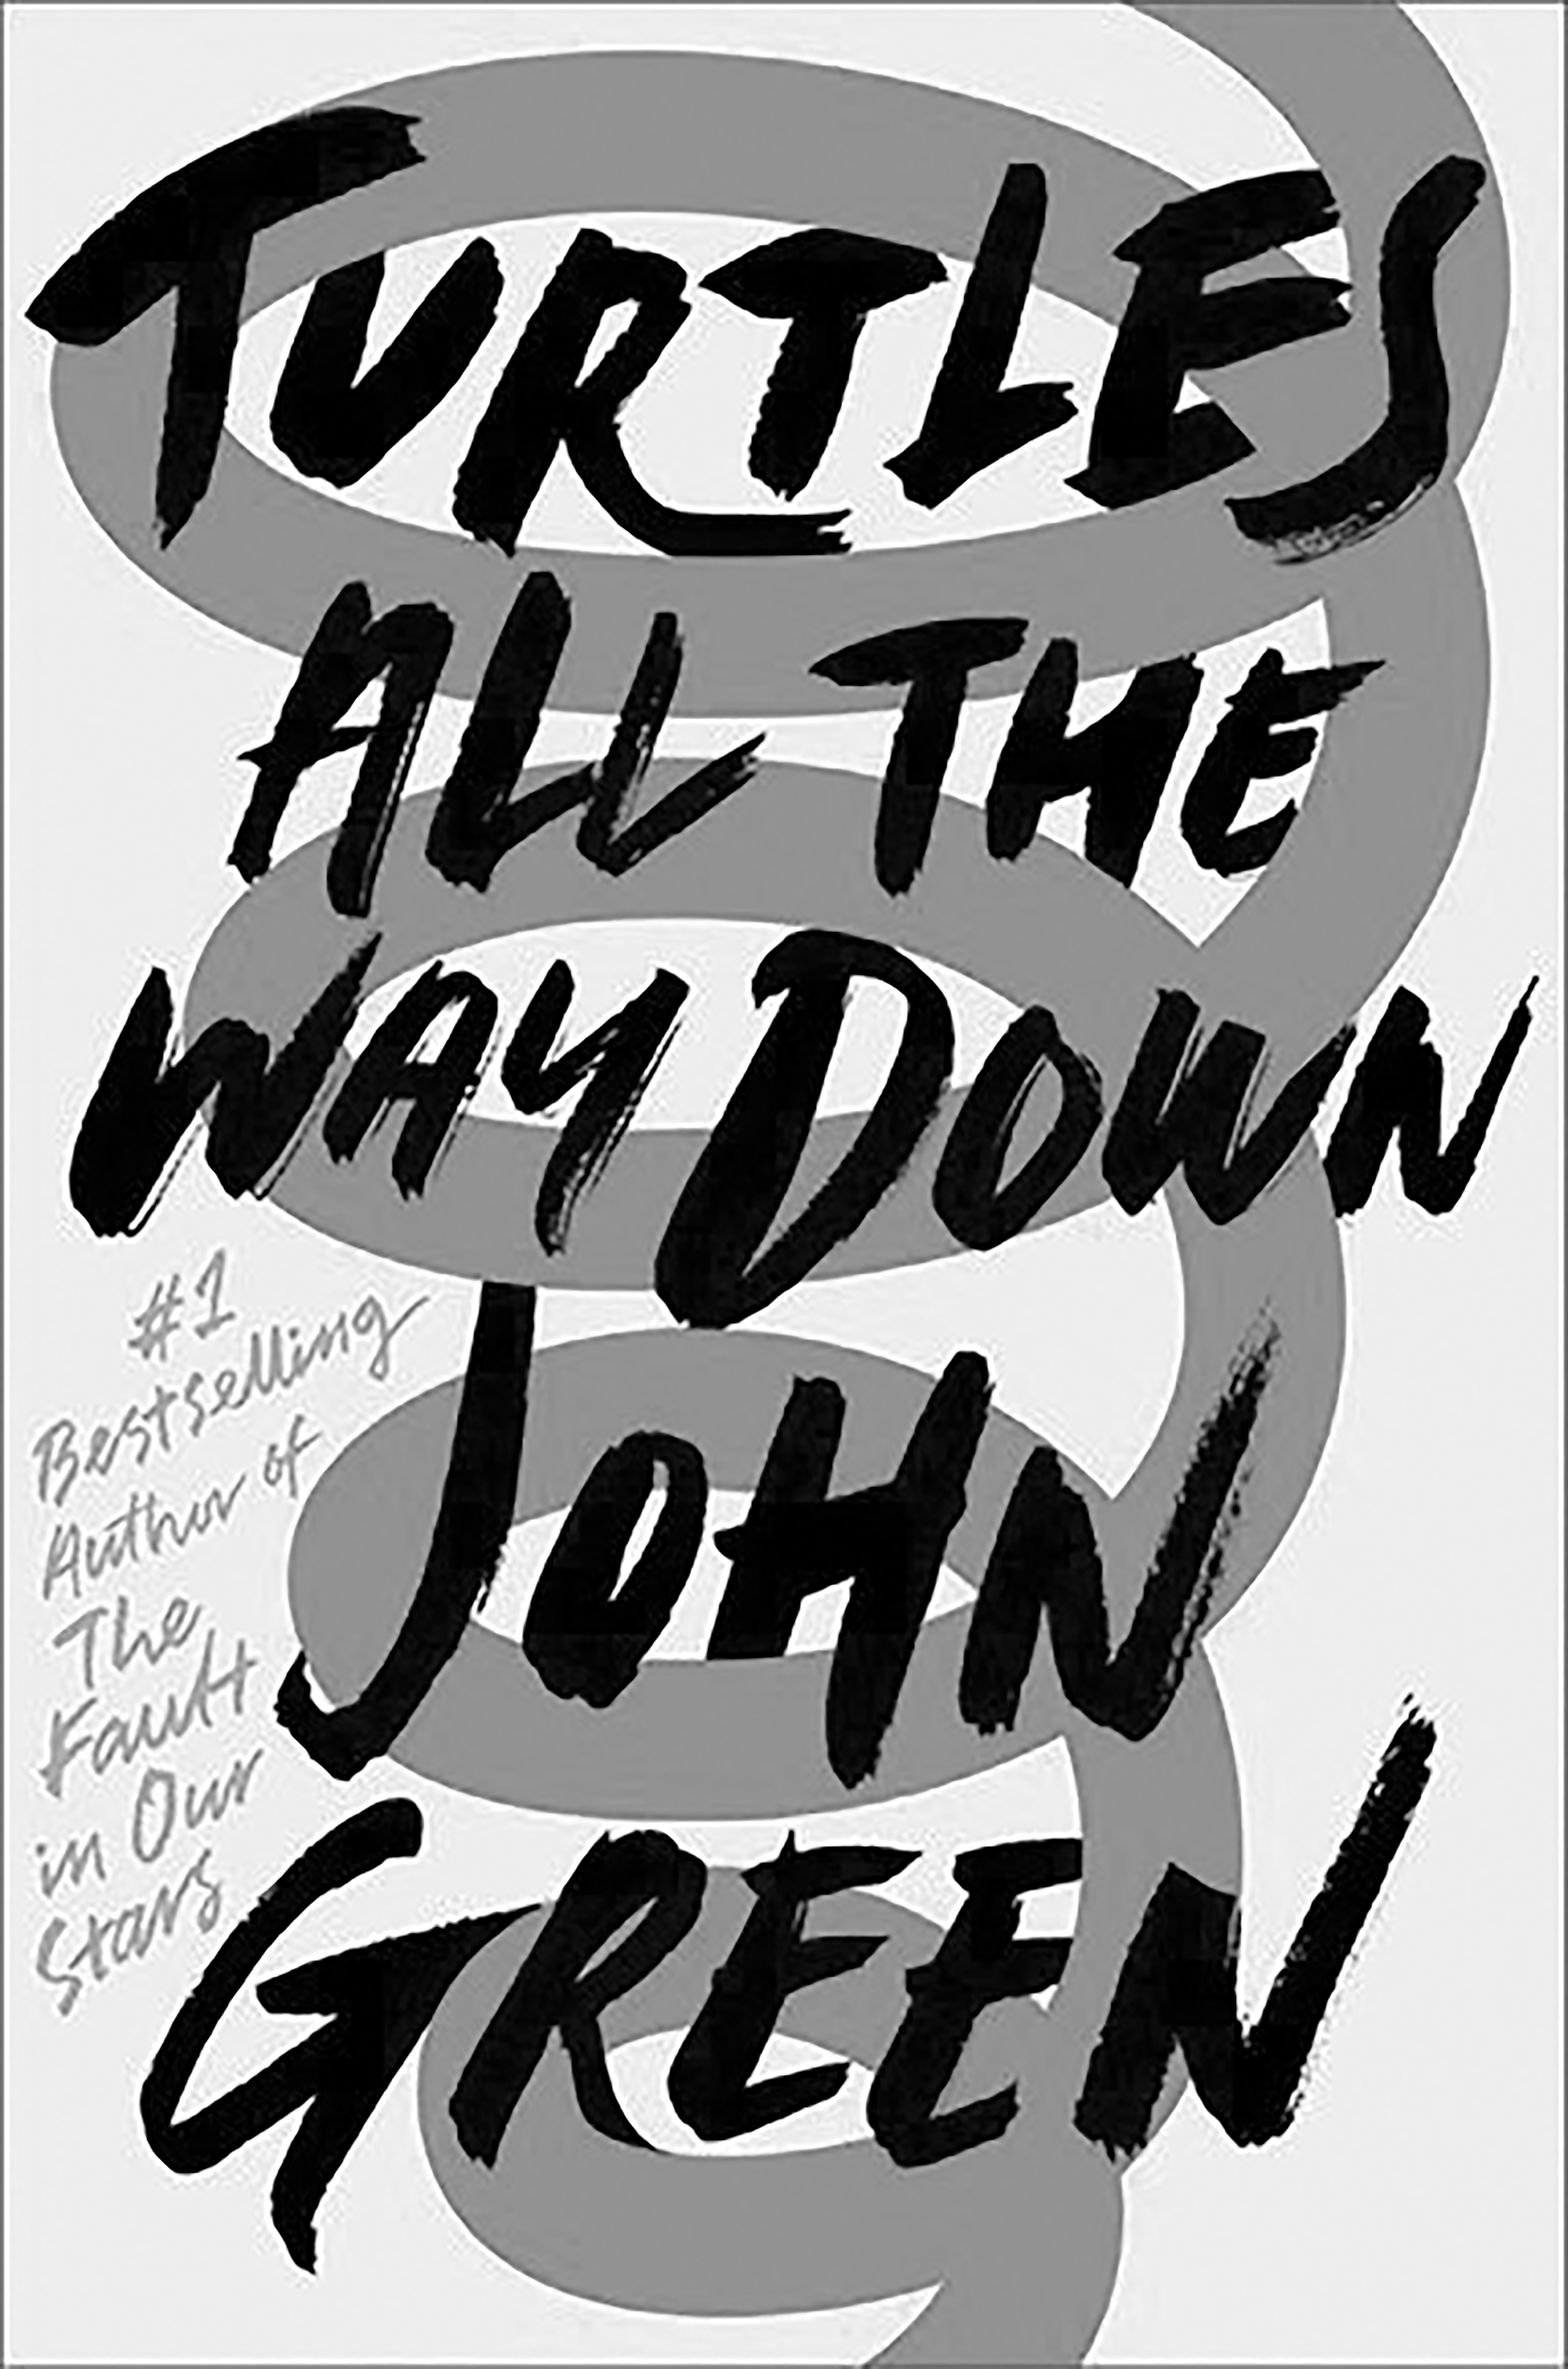 ‘Turtles All the Way Down’ by John Green